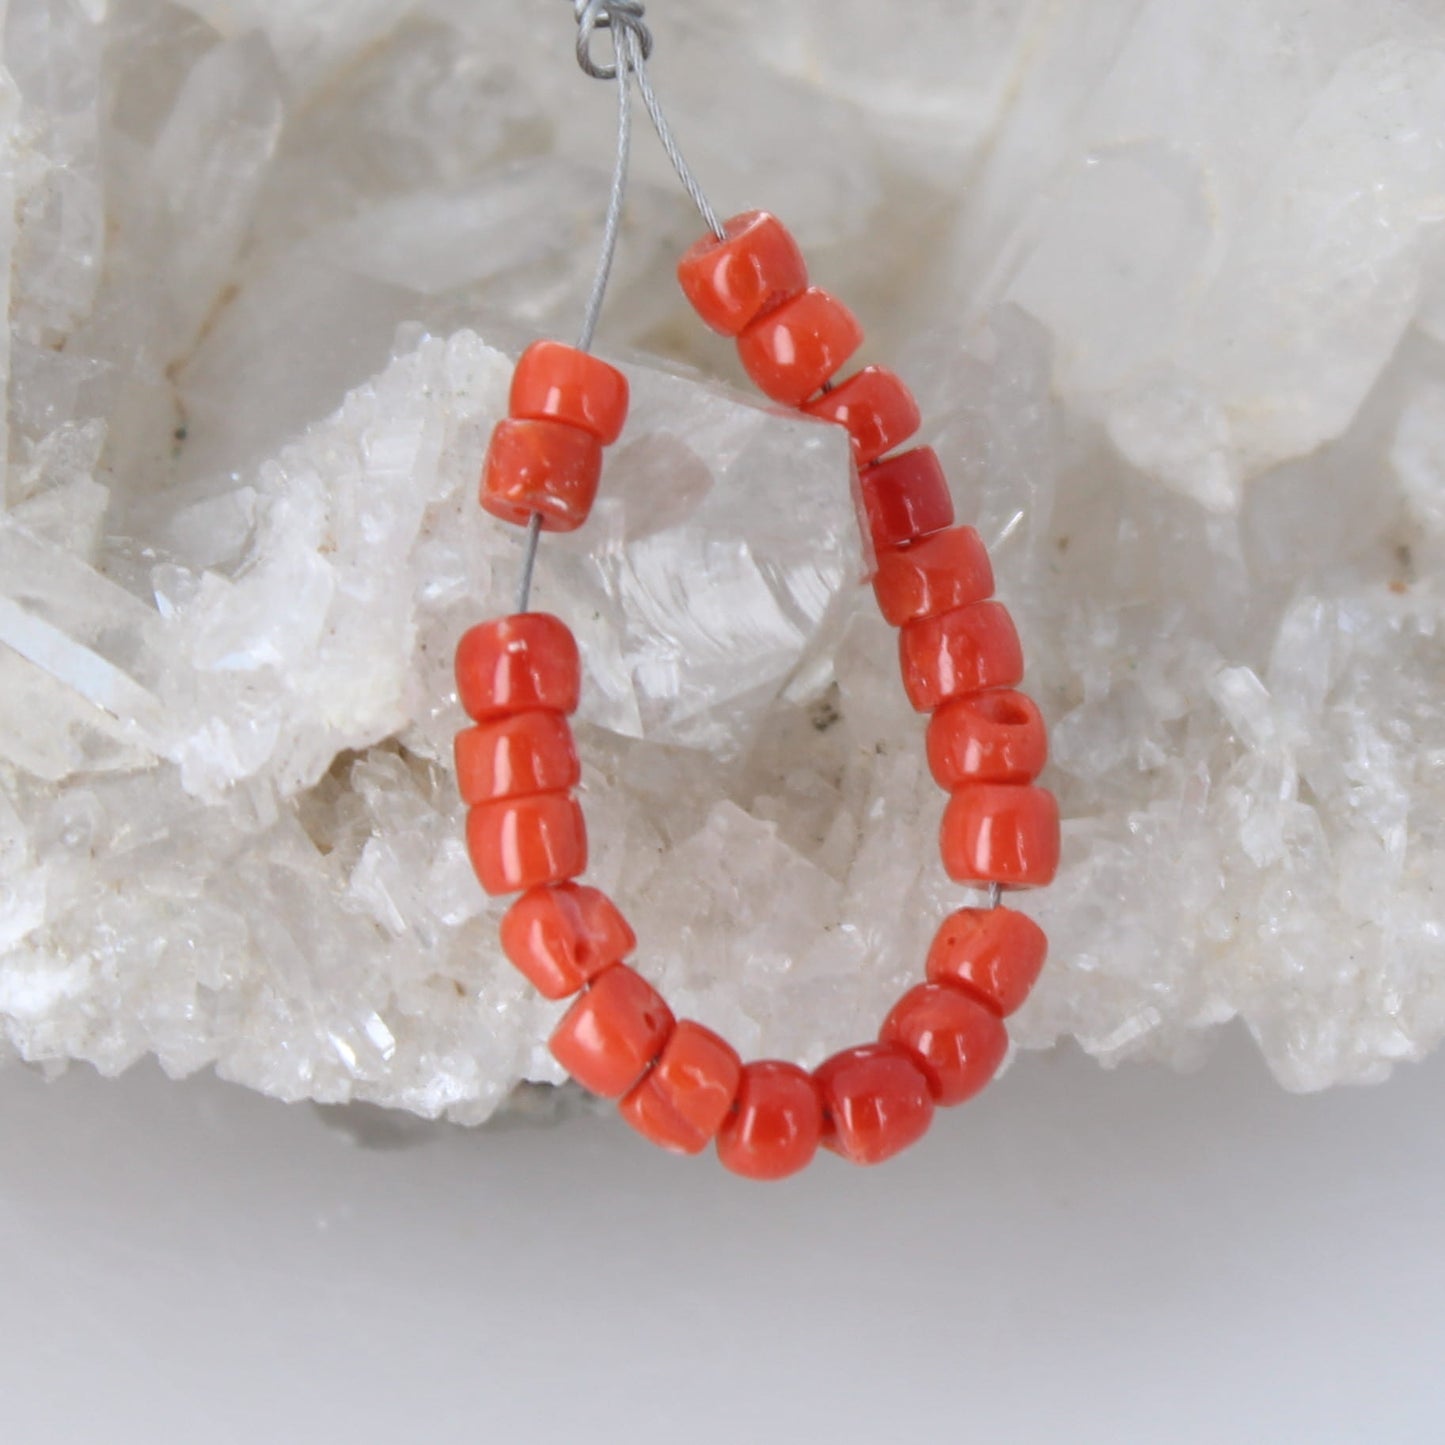 AAA Light Red Italian Coral Beads Pueblo Shaped 4mm 20 Beads